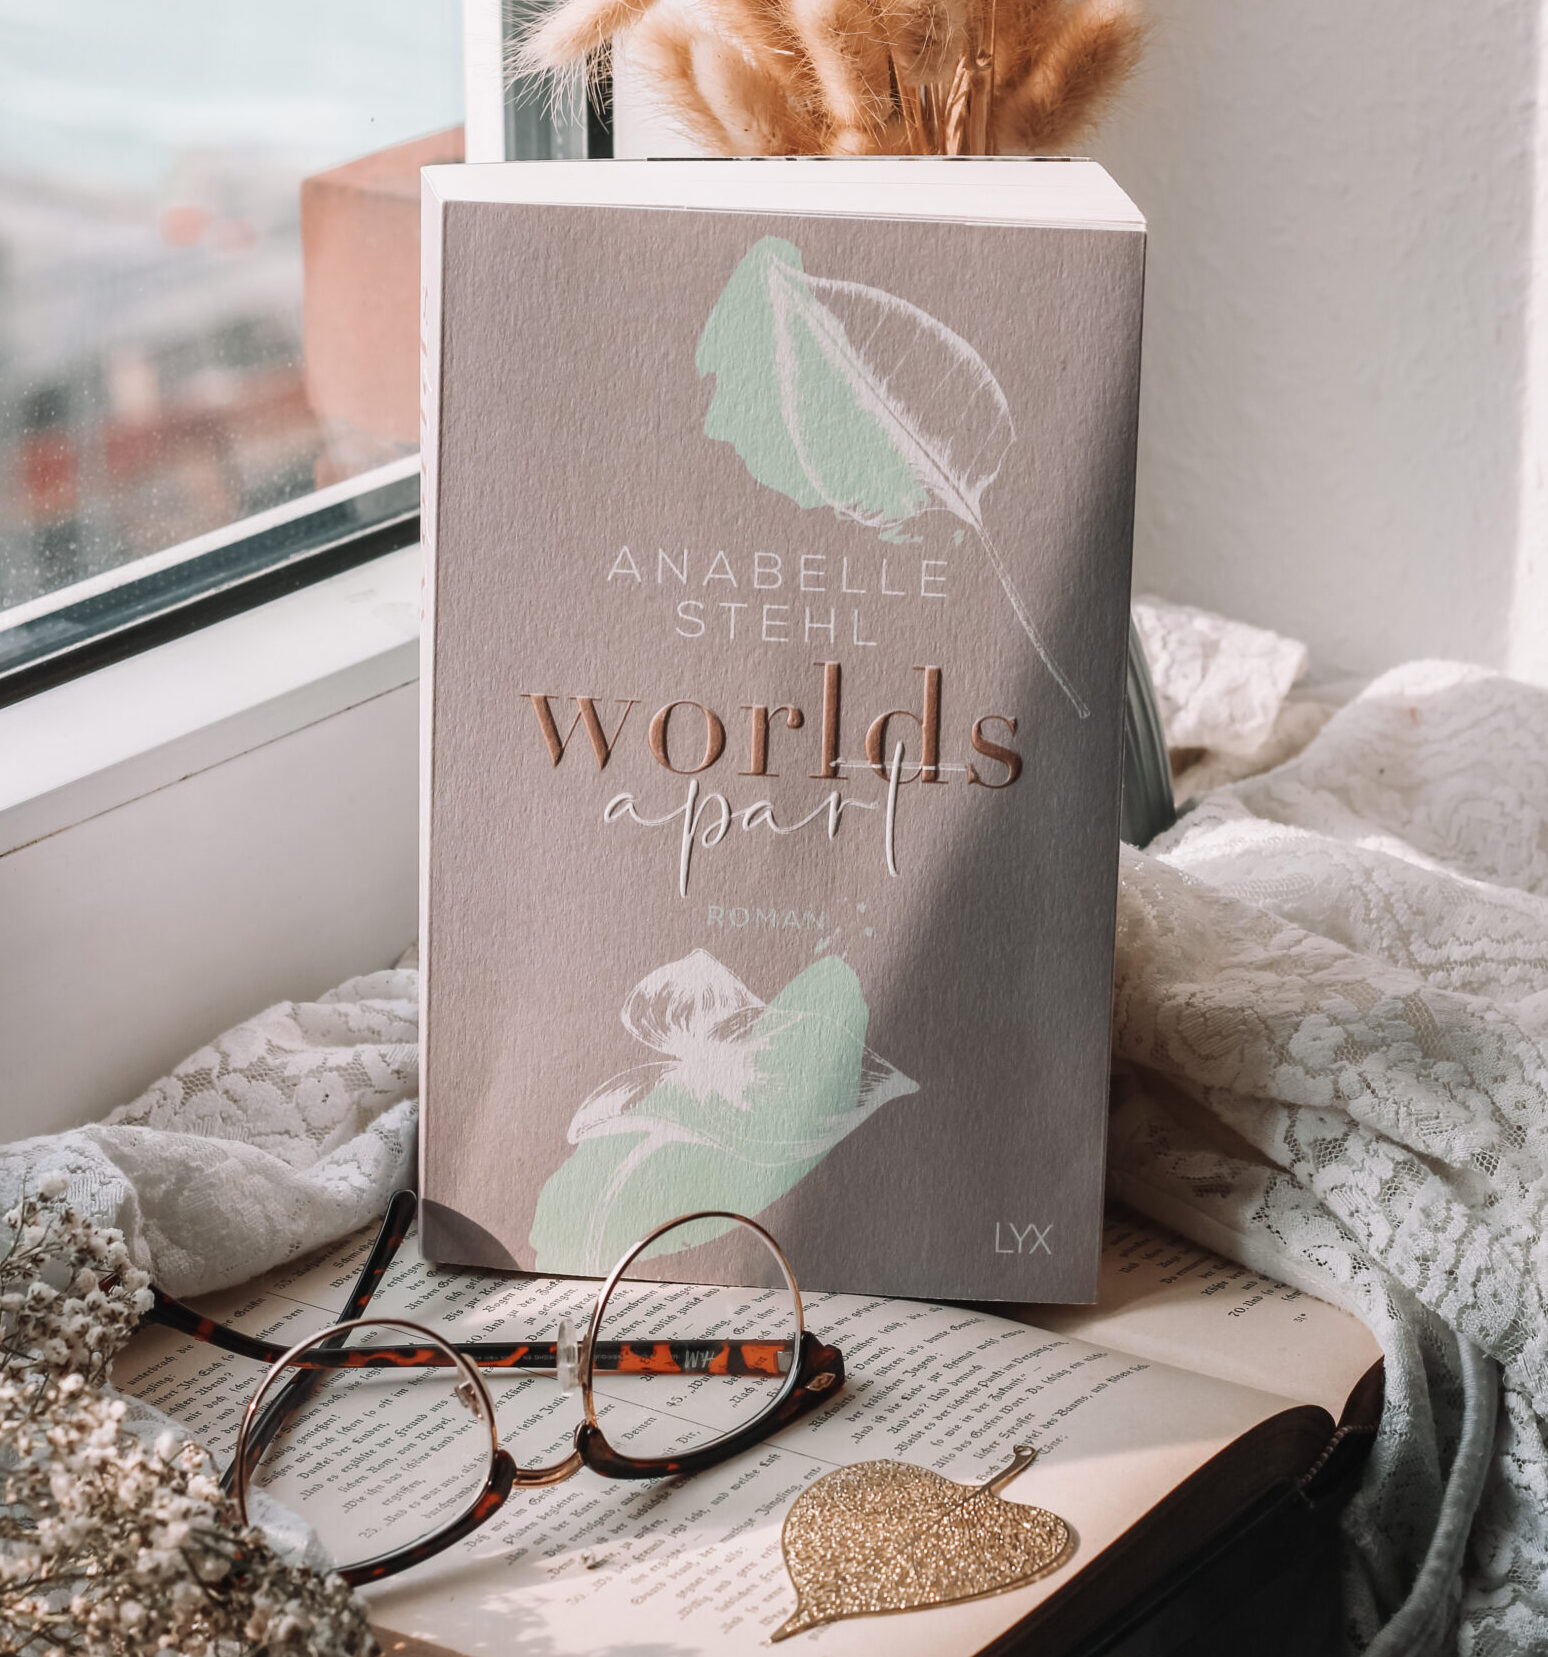 [All about the books] Anabelle Stehl – Worlds apart